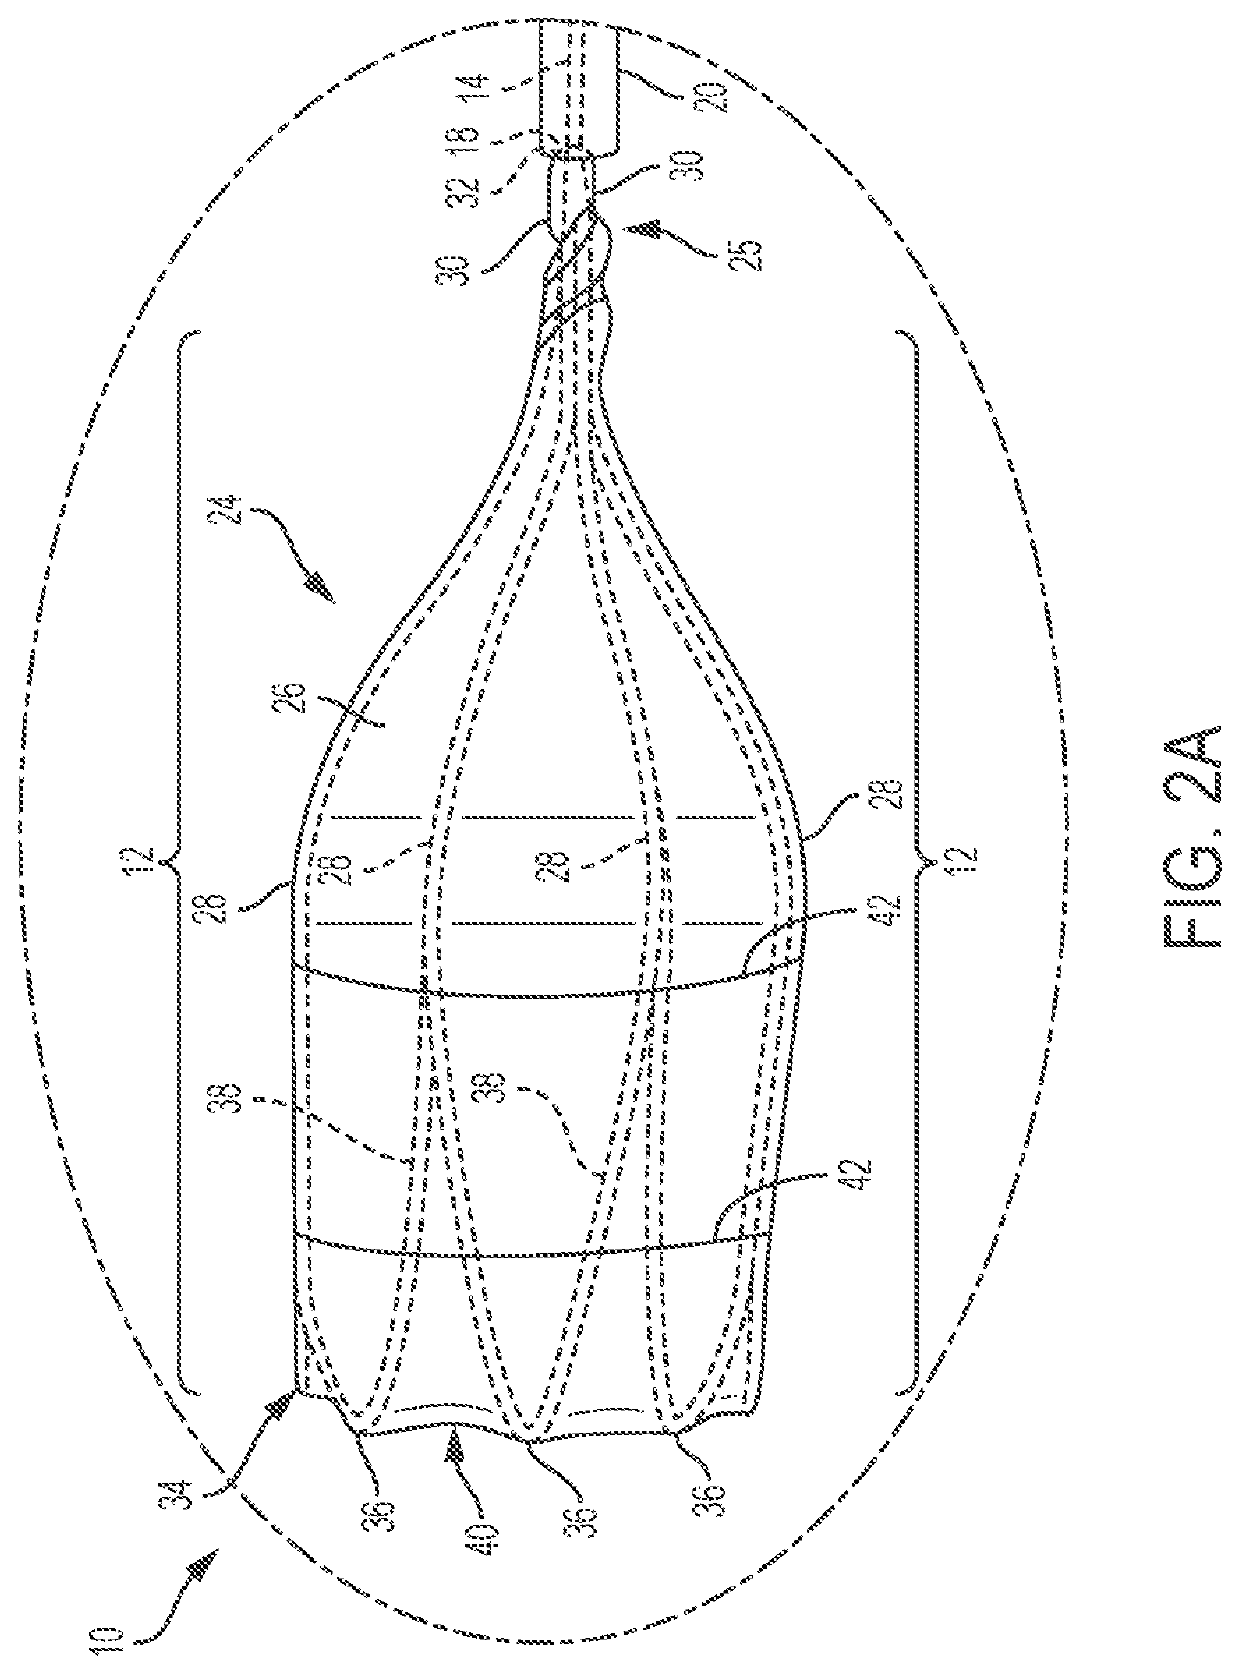 Esophageal Temporary Occlusion Device and Method for Endotracheal Intubation and Orogastric Tube Insertion